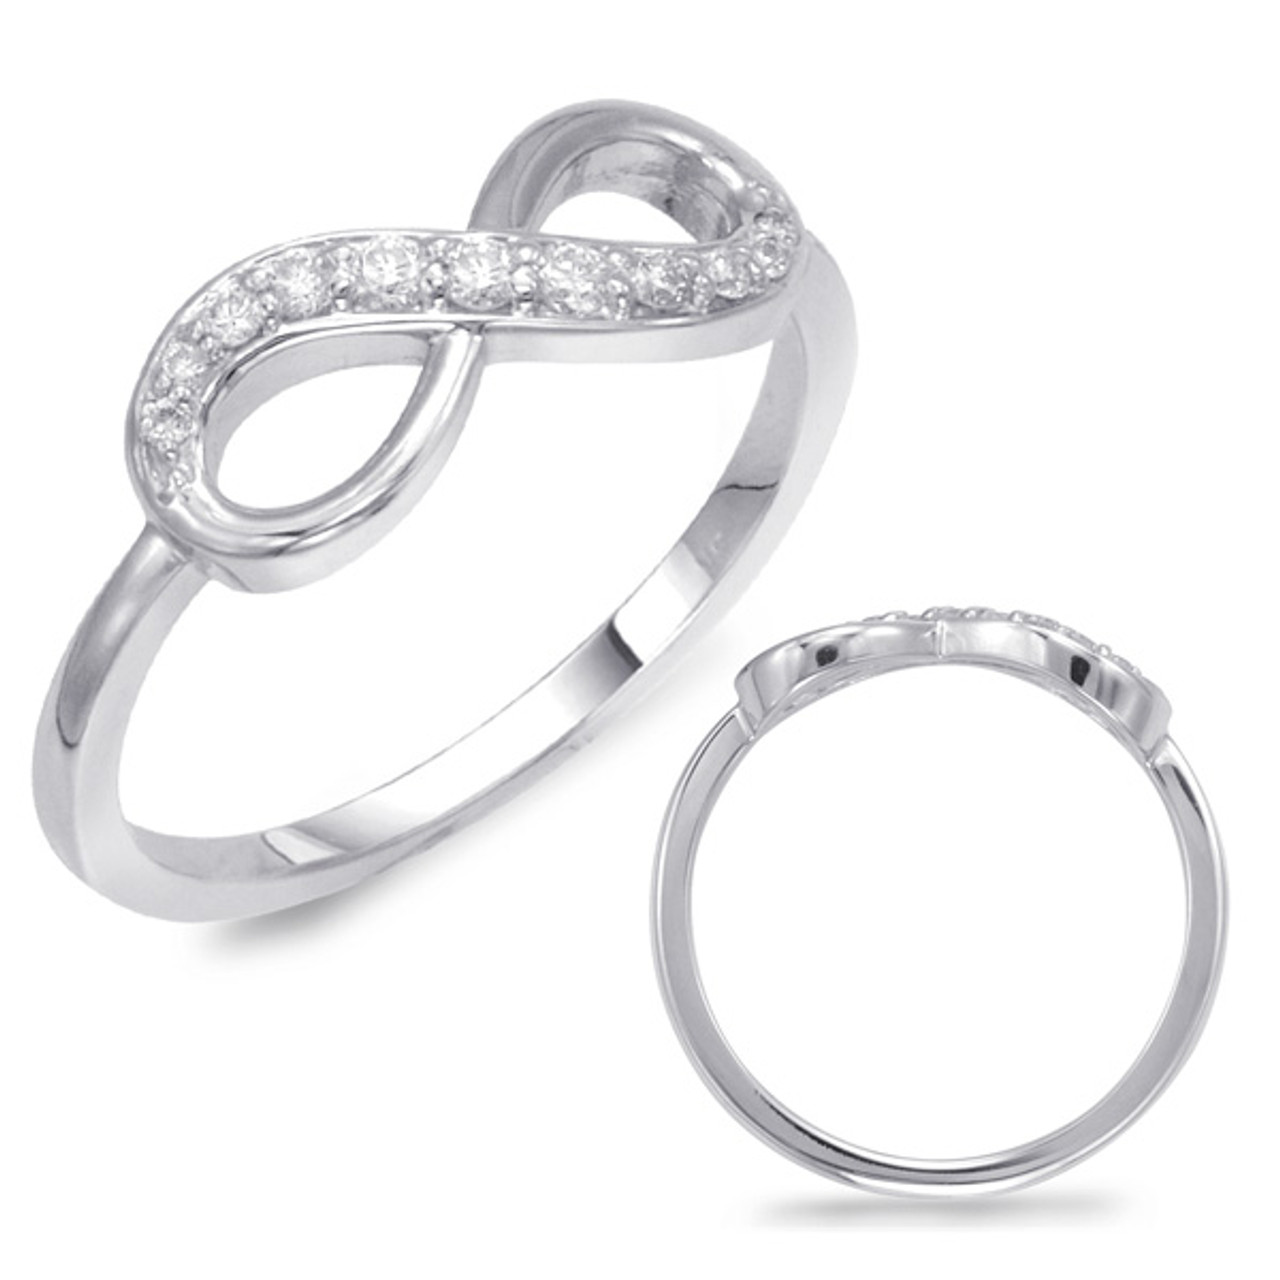 Infinity Ring - Buy Infinity Ring online in India